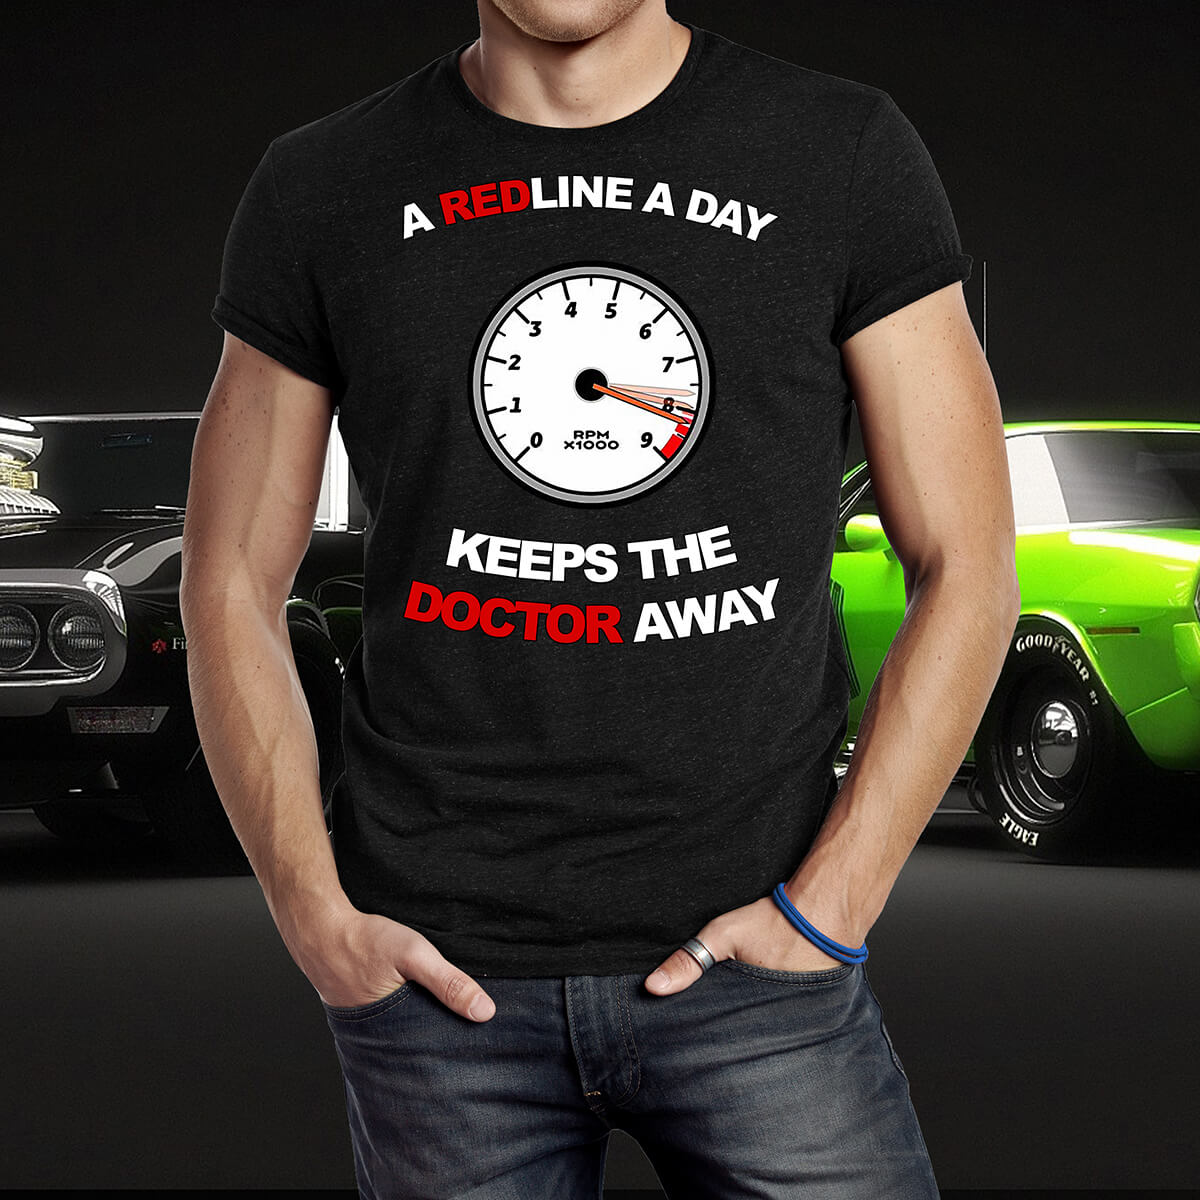 A REDLINE A DAY KEEPS THE DOCTOR AWAY T-SHIRT